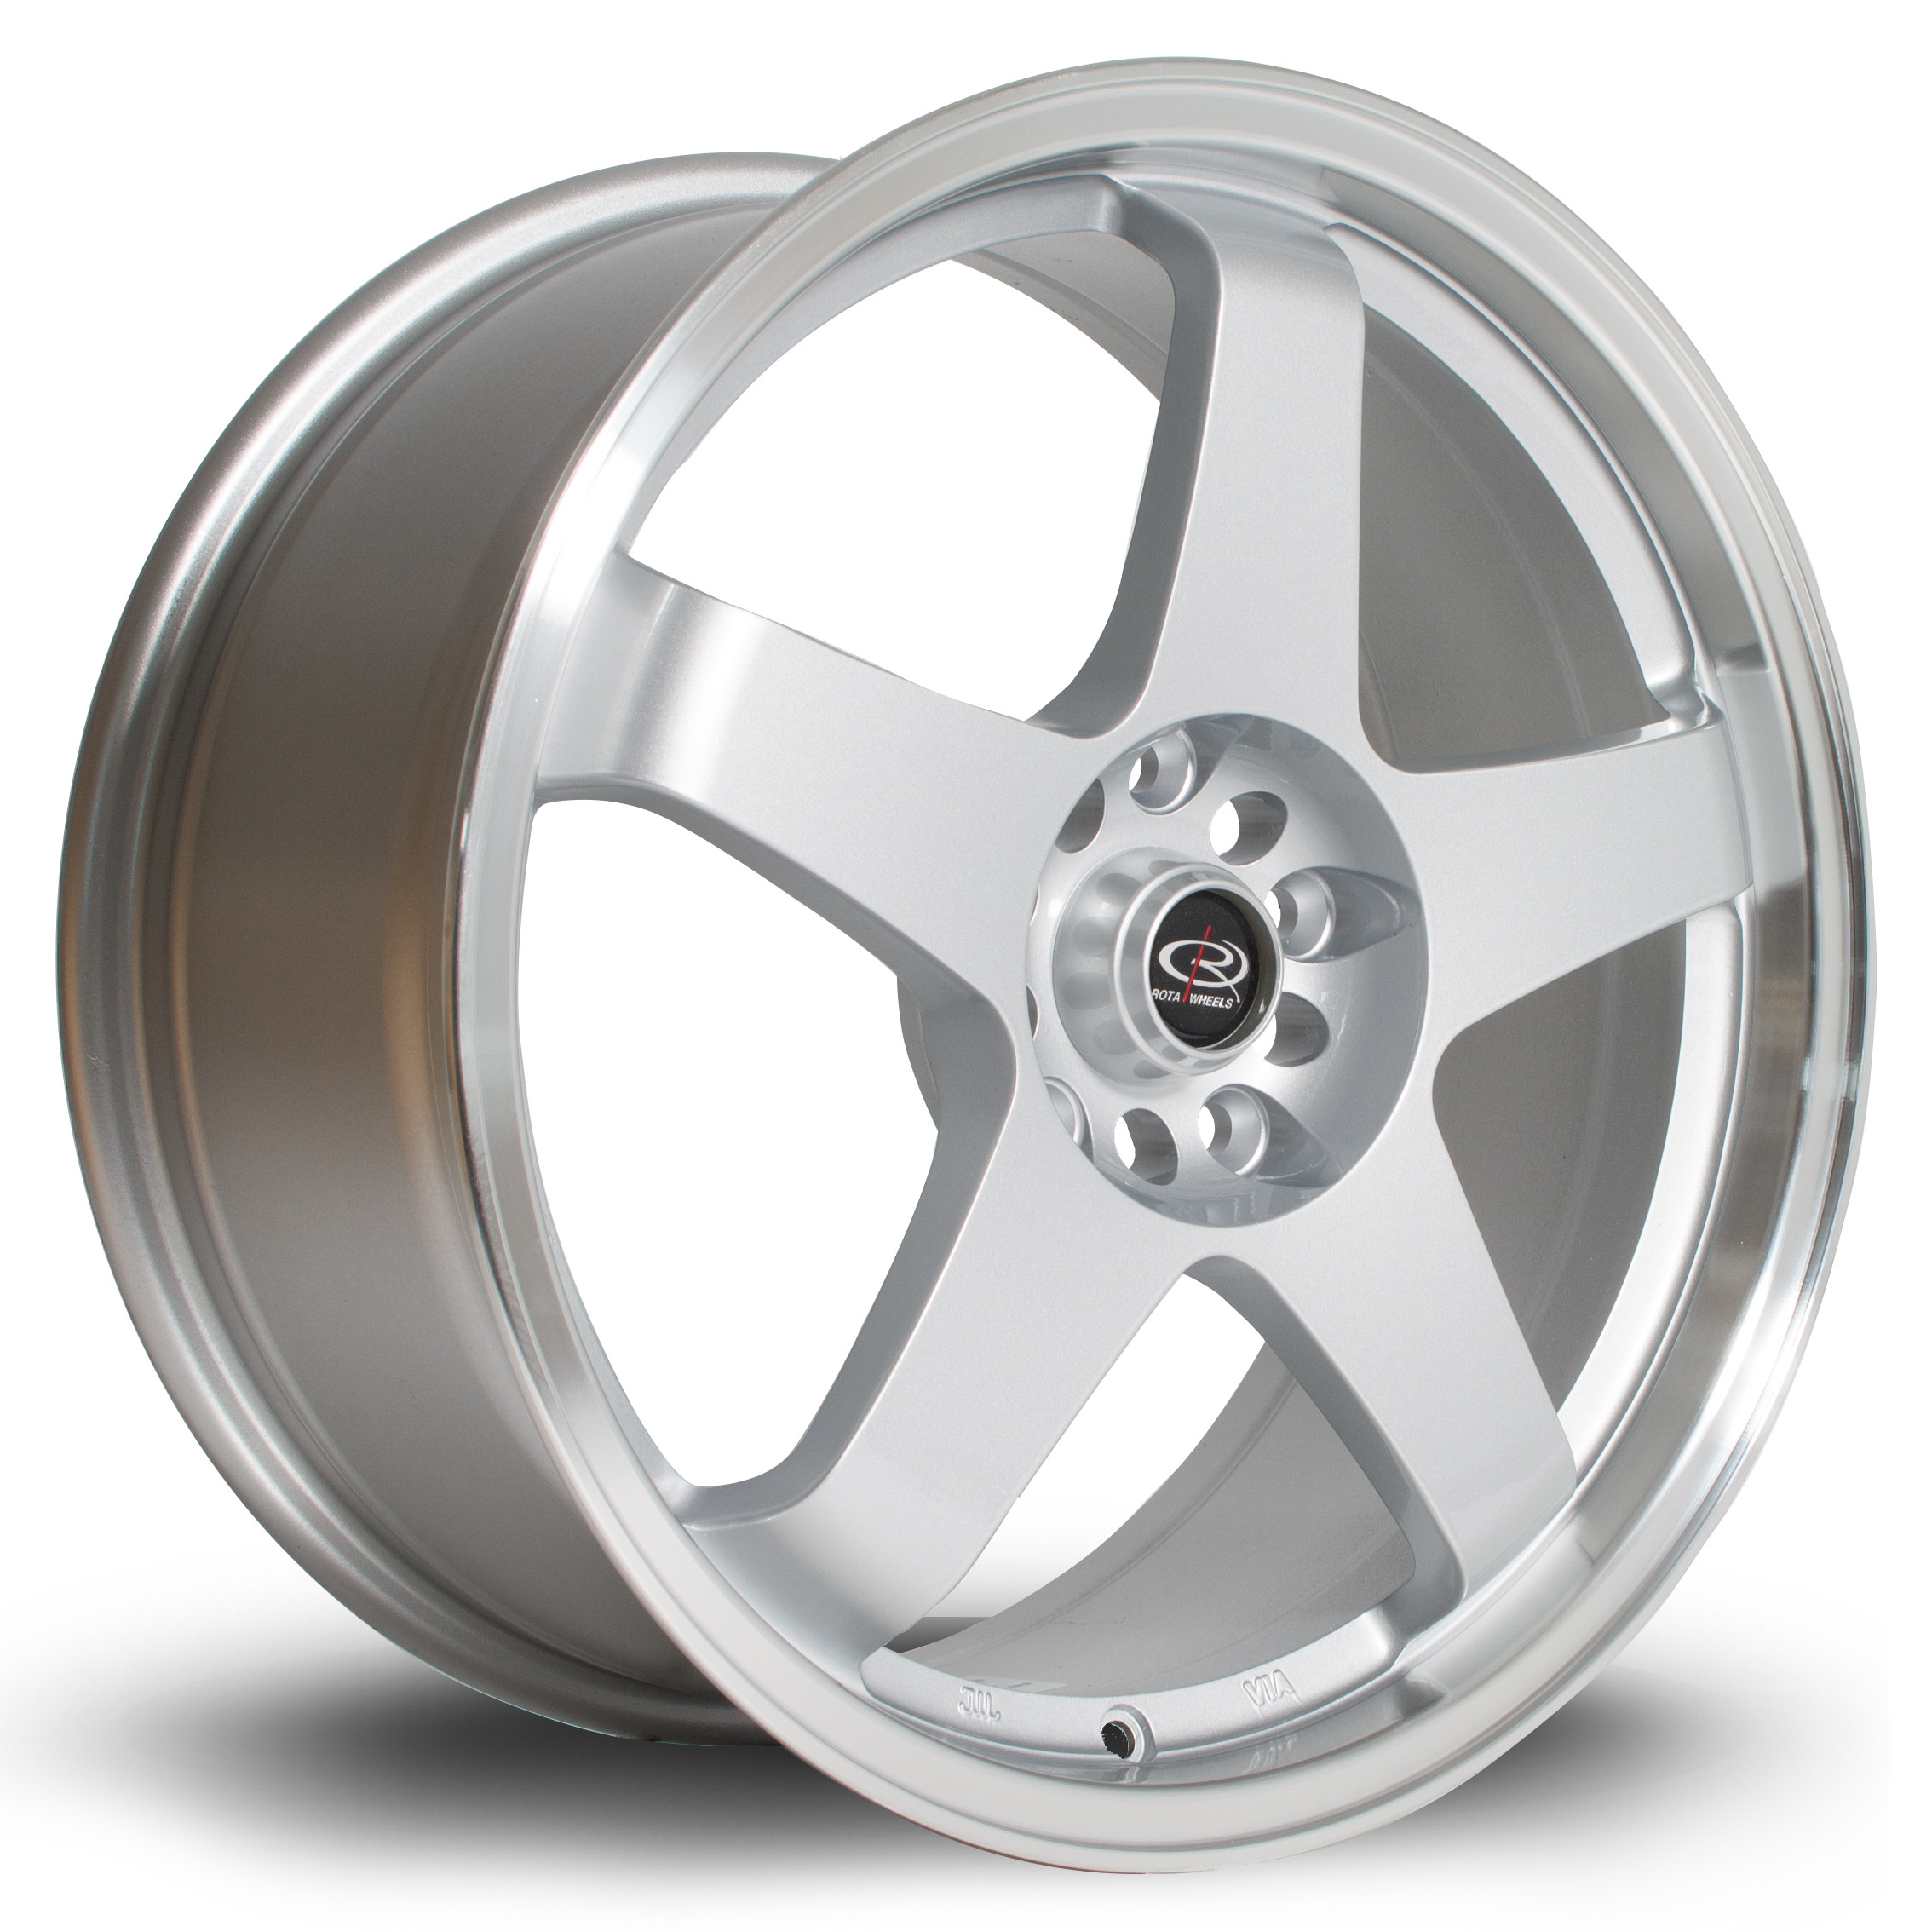 GTR 18x8 5x114 ET48 Silver with Polished Lip